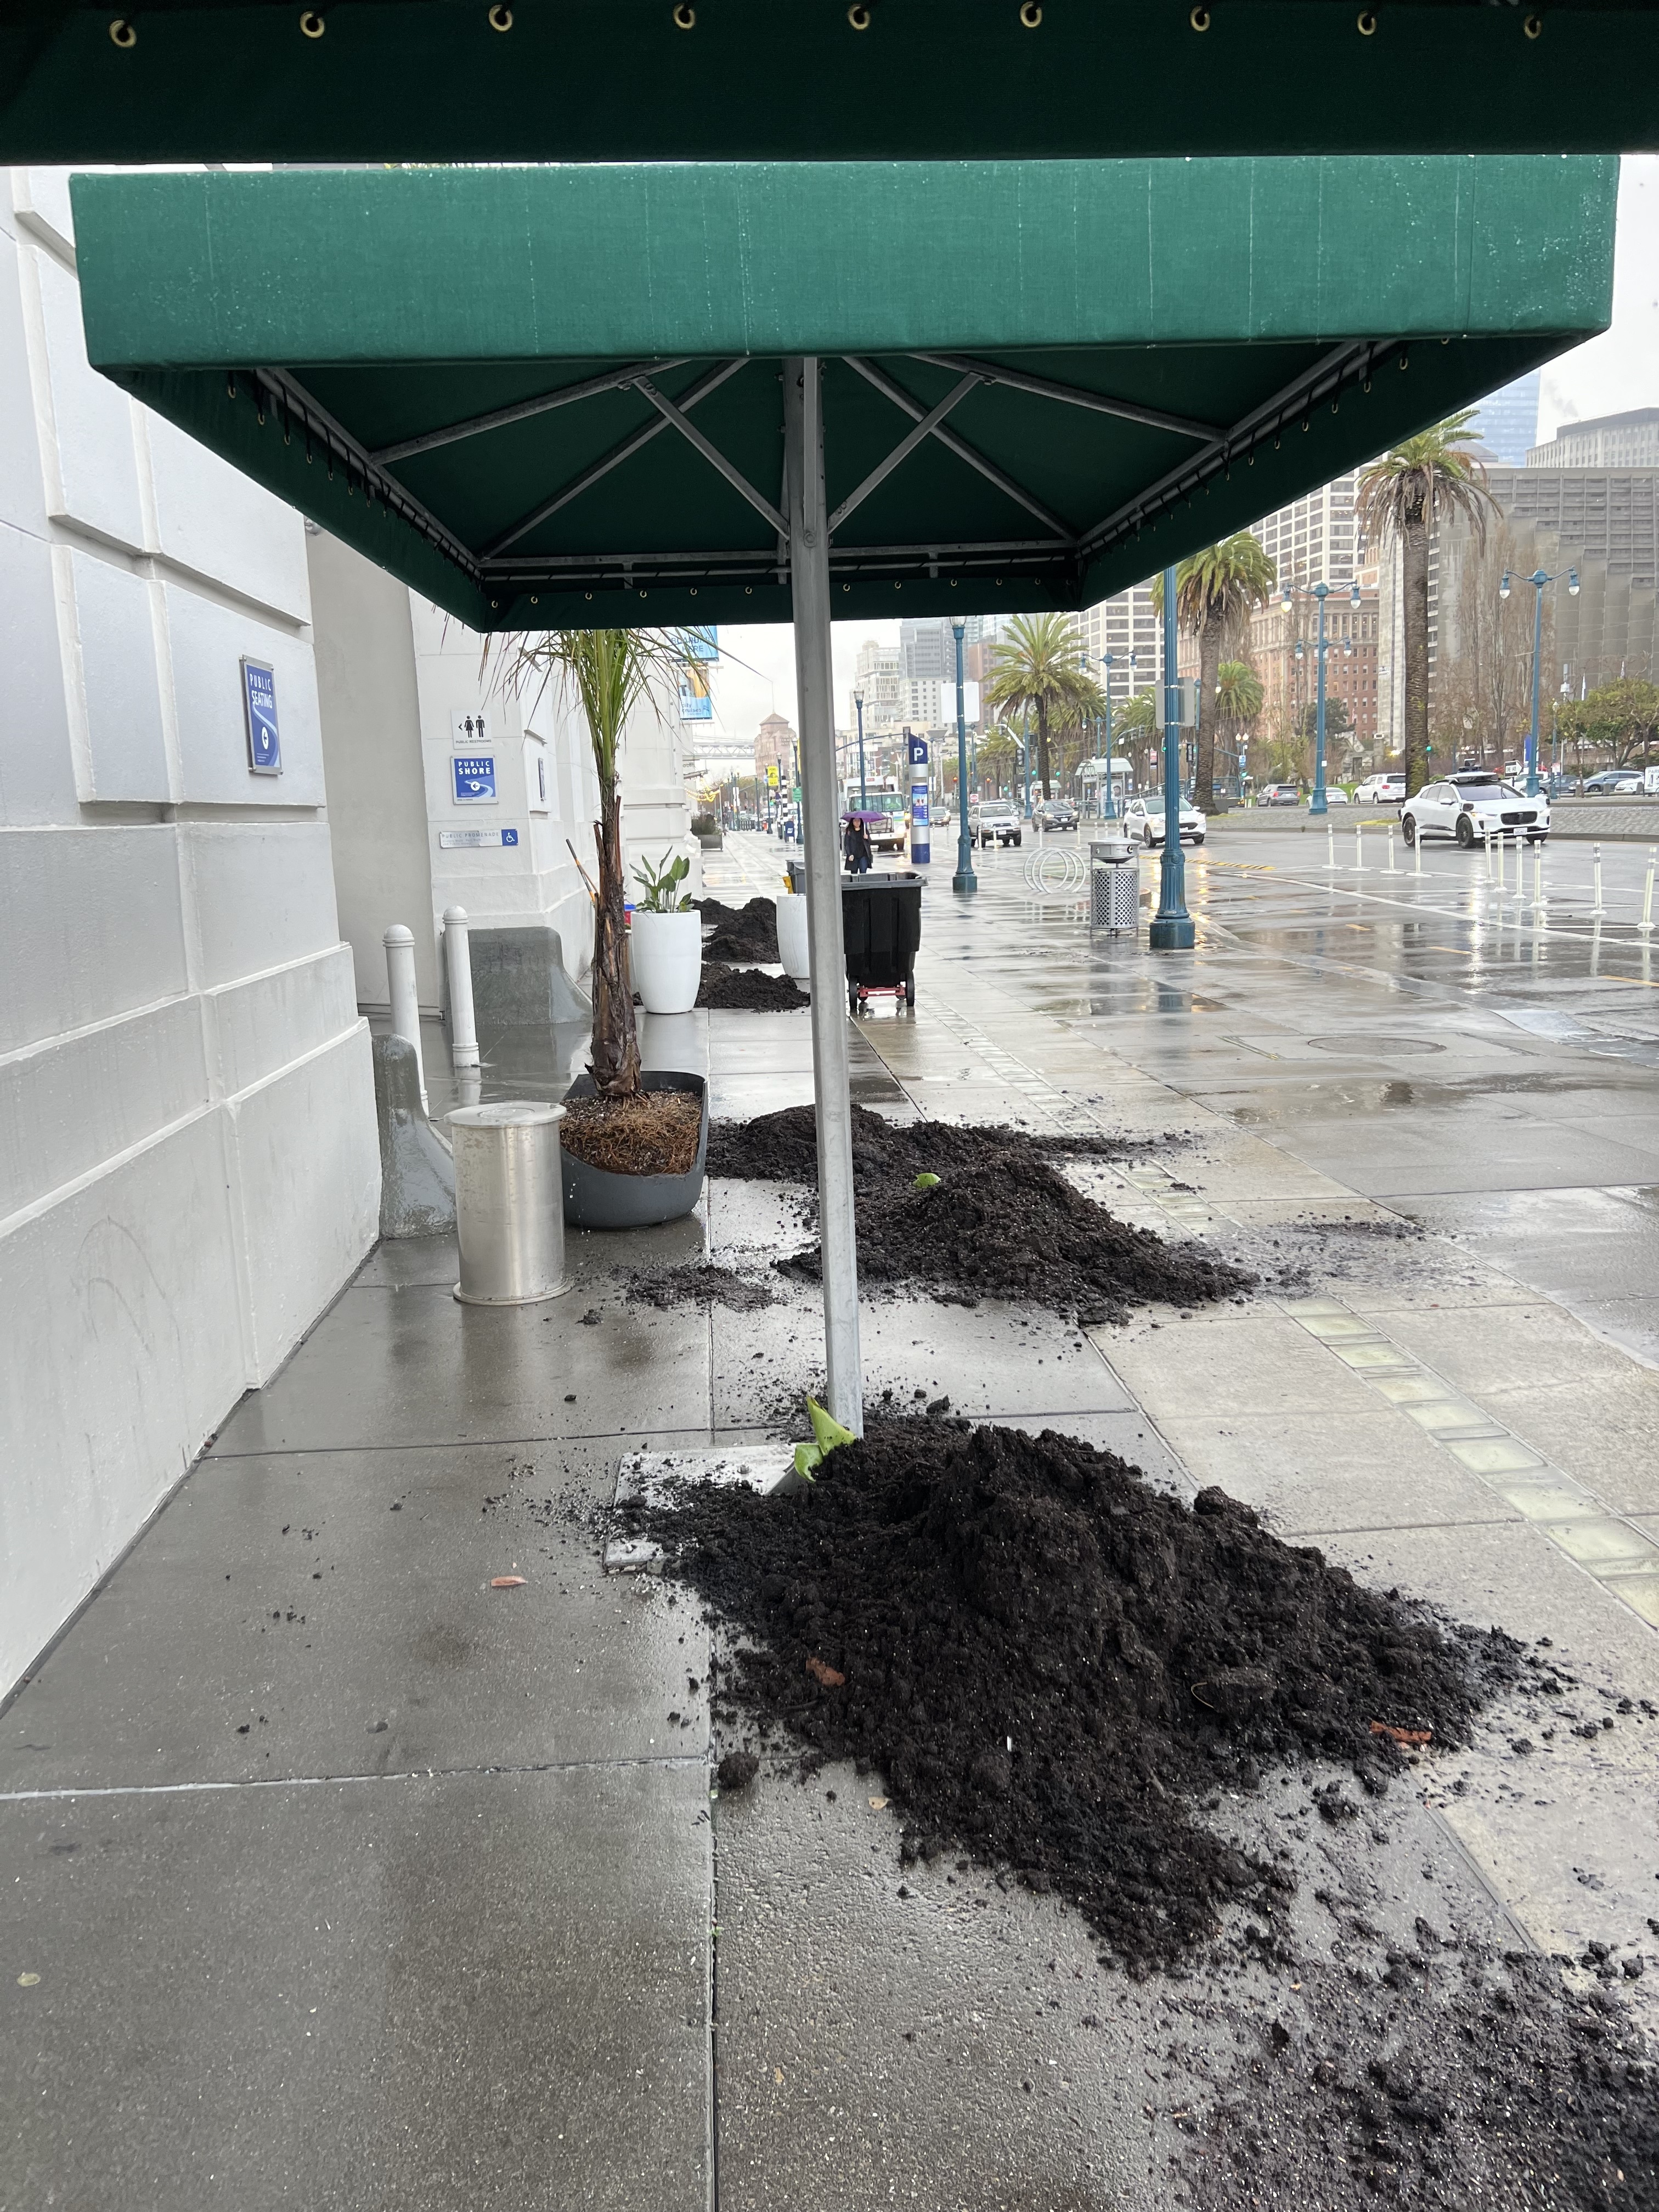 A wet sidewalk under a green awning with scattered piles of overturned planter soil.